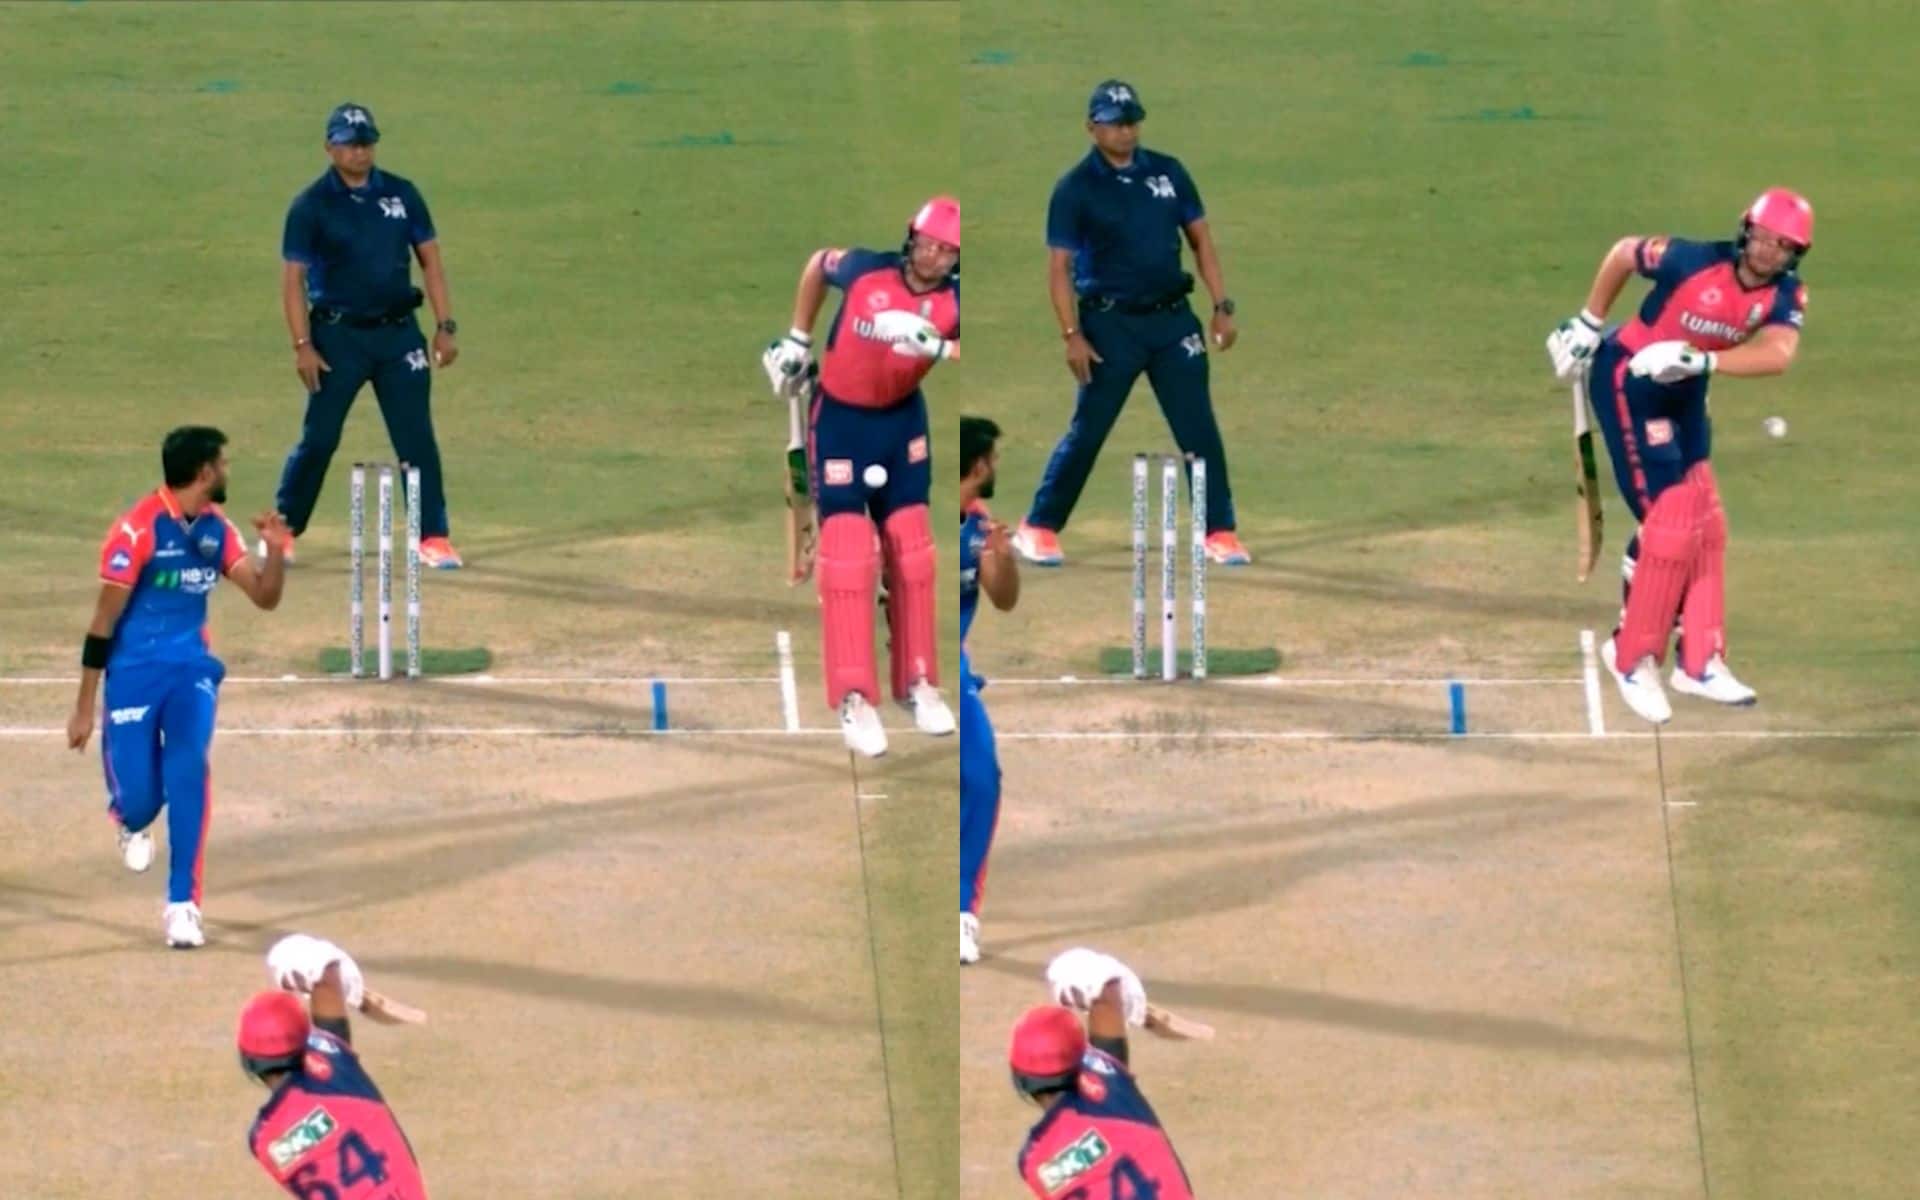 Jaiswal's shot was almost straight to Buttler's box (X.com)